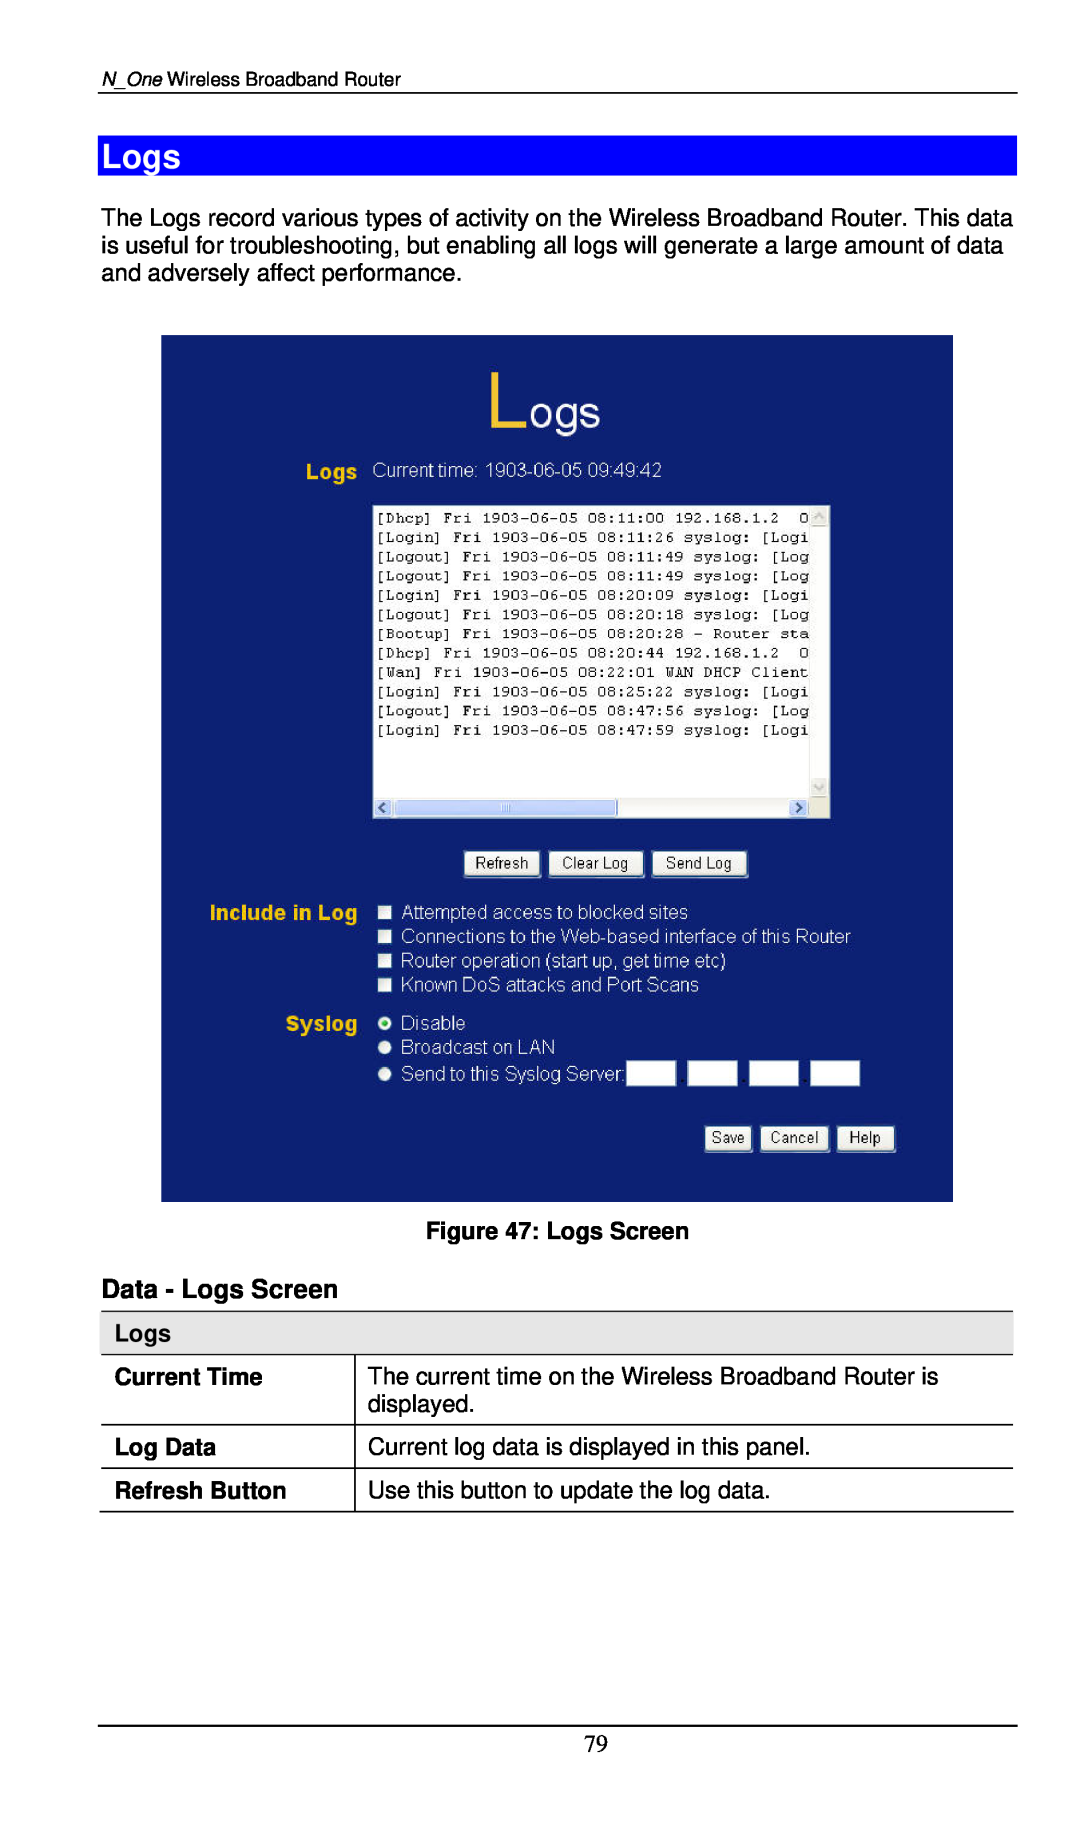 LevelOne WBR-6000 Logs Screen, Current Time, The current time on the Wireless Broadband Router is, displayed, Log Data 